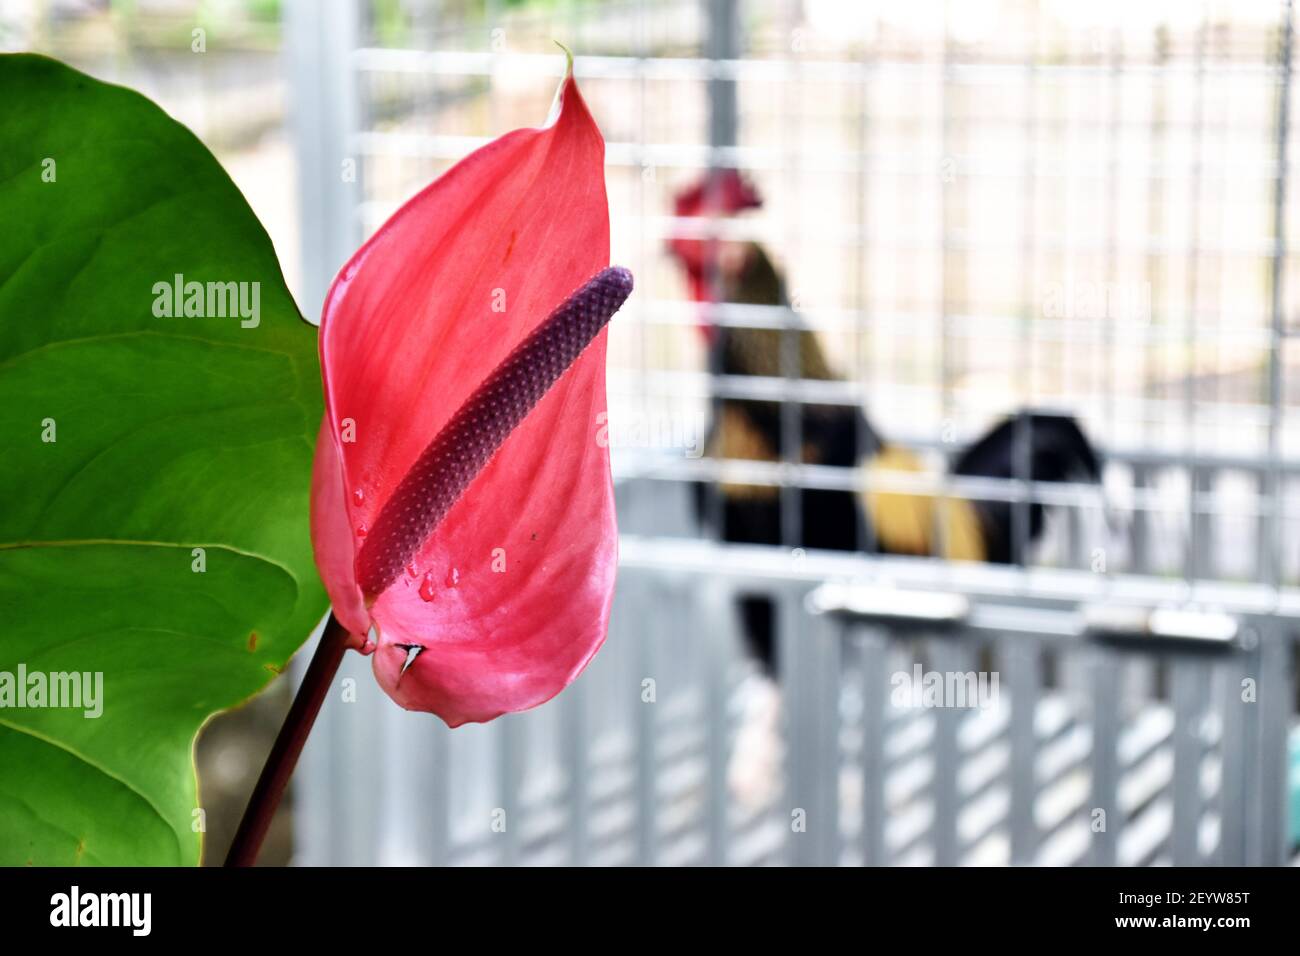 Red Peace Lily or Flamingo Flower Stock Photo